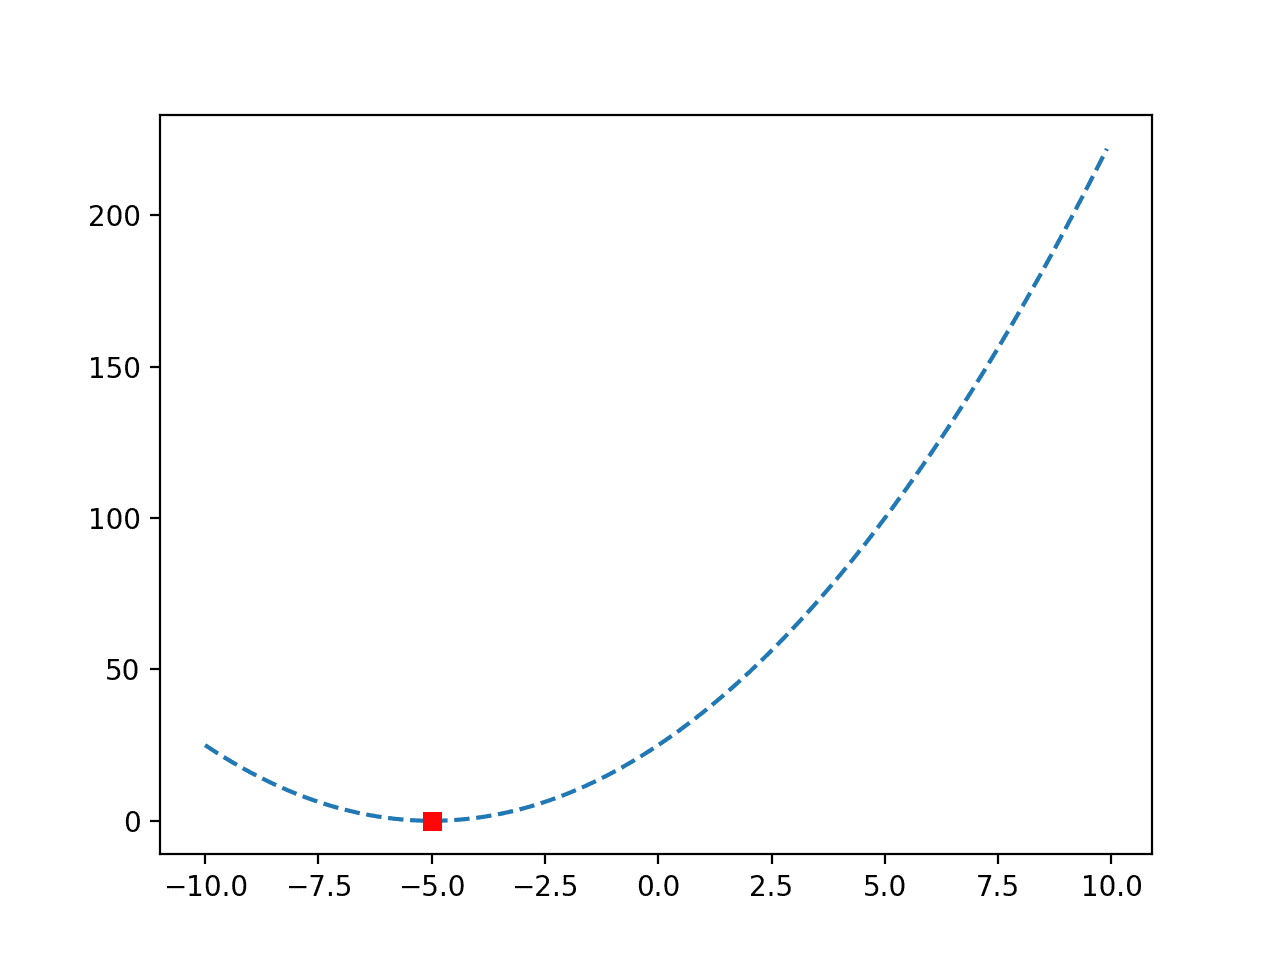 Line Plot of a Convex Objective Function with Optima Marked